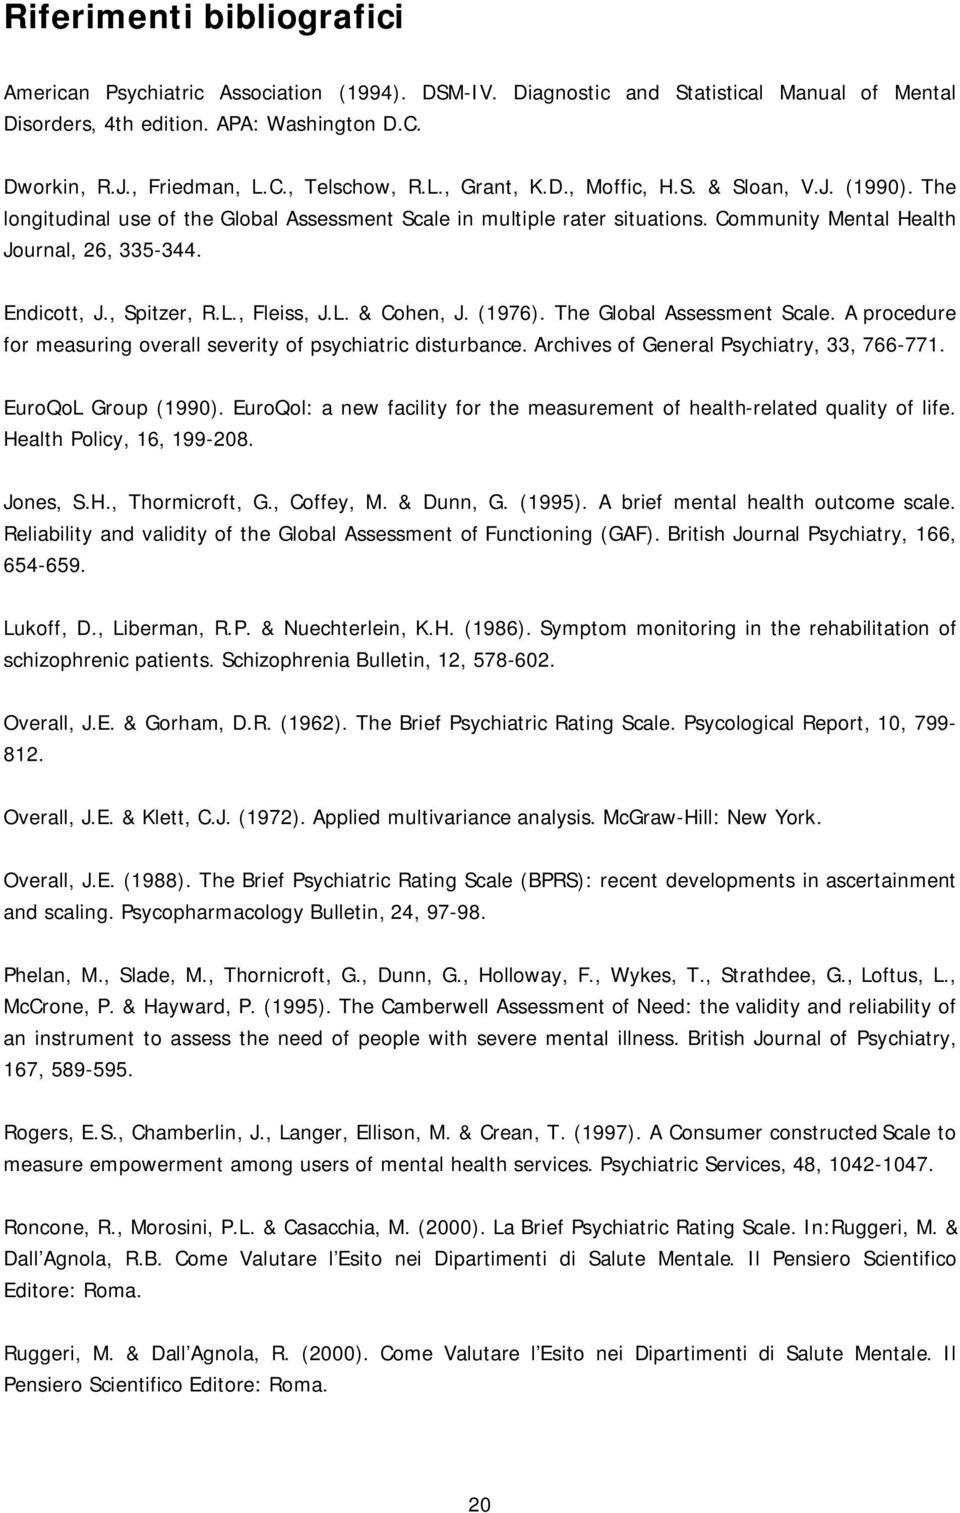 , Spitzer, R.L., Fleiss, J.L. & Cohen, J. (1976). The Global Assessment Scale. A procedure for measuring overall severity of psychiatric disturbance. Archives of General Psychiatry, 33, 766-771.